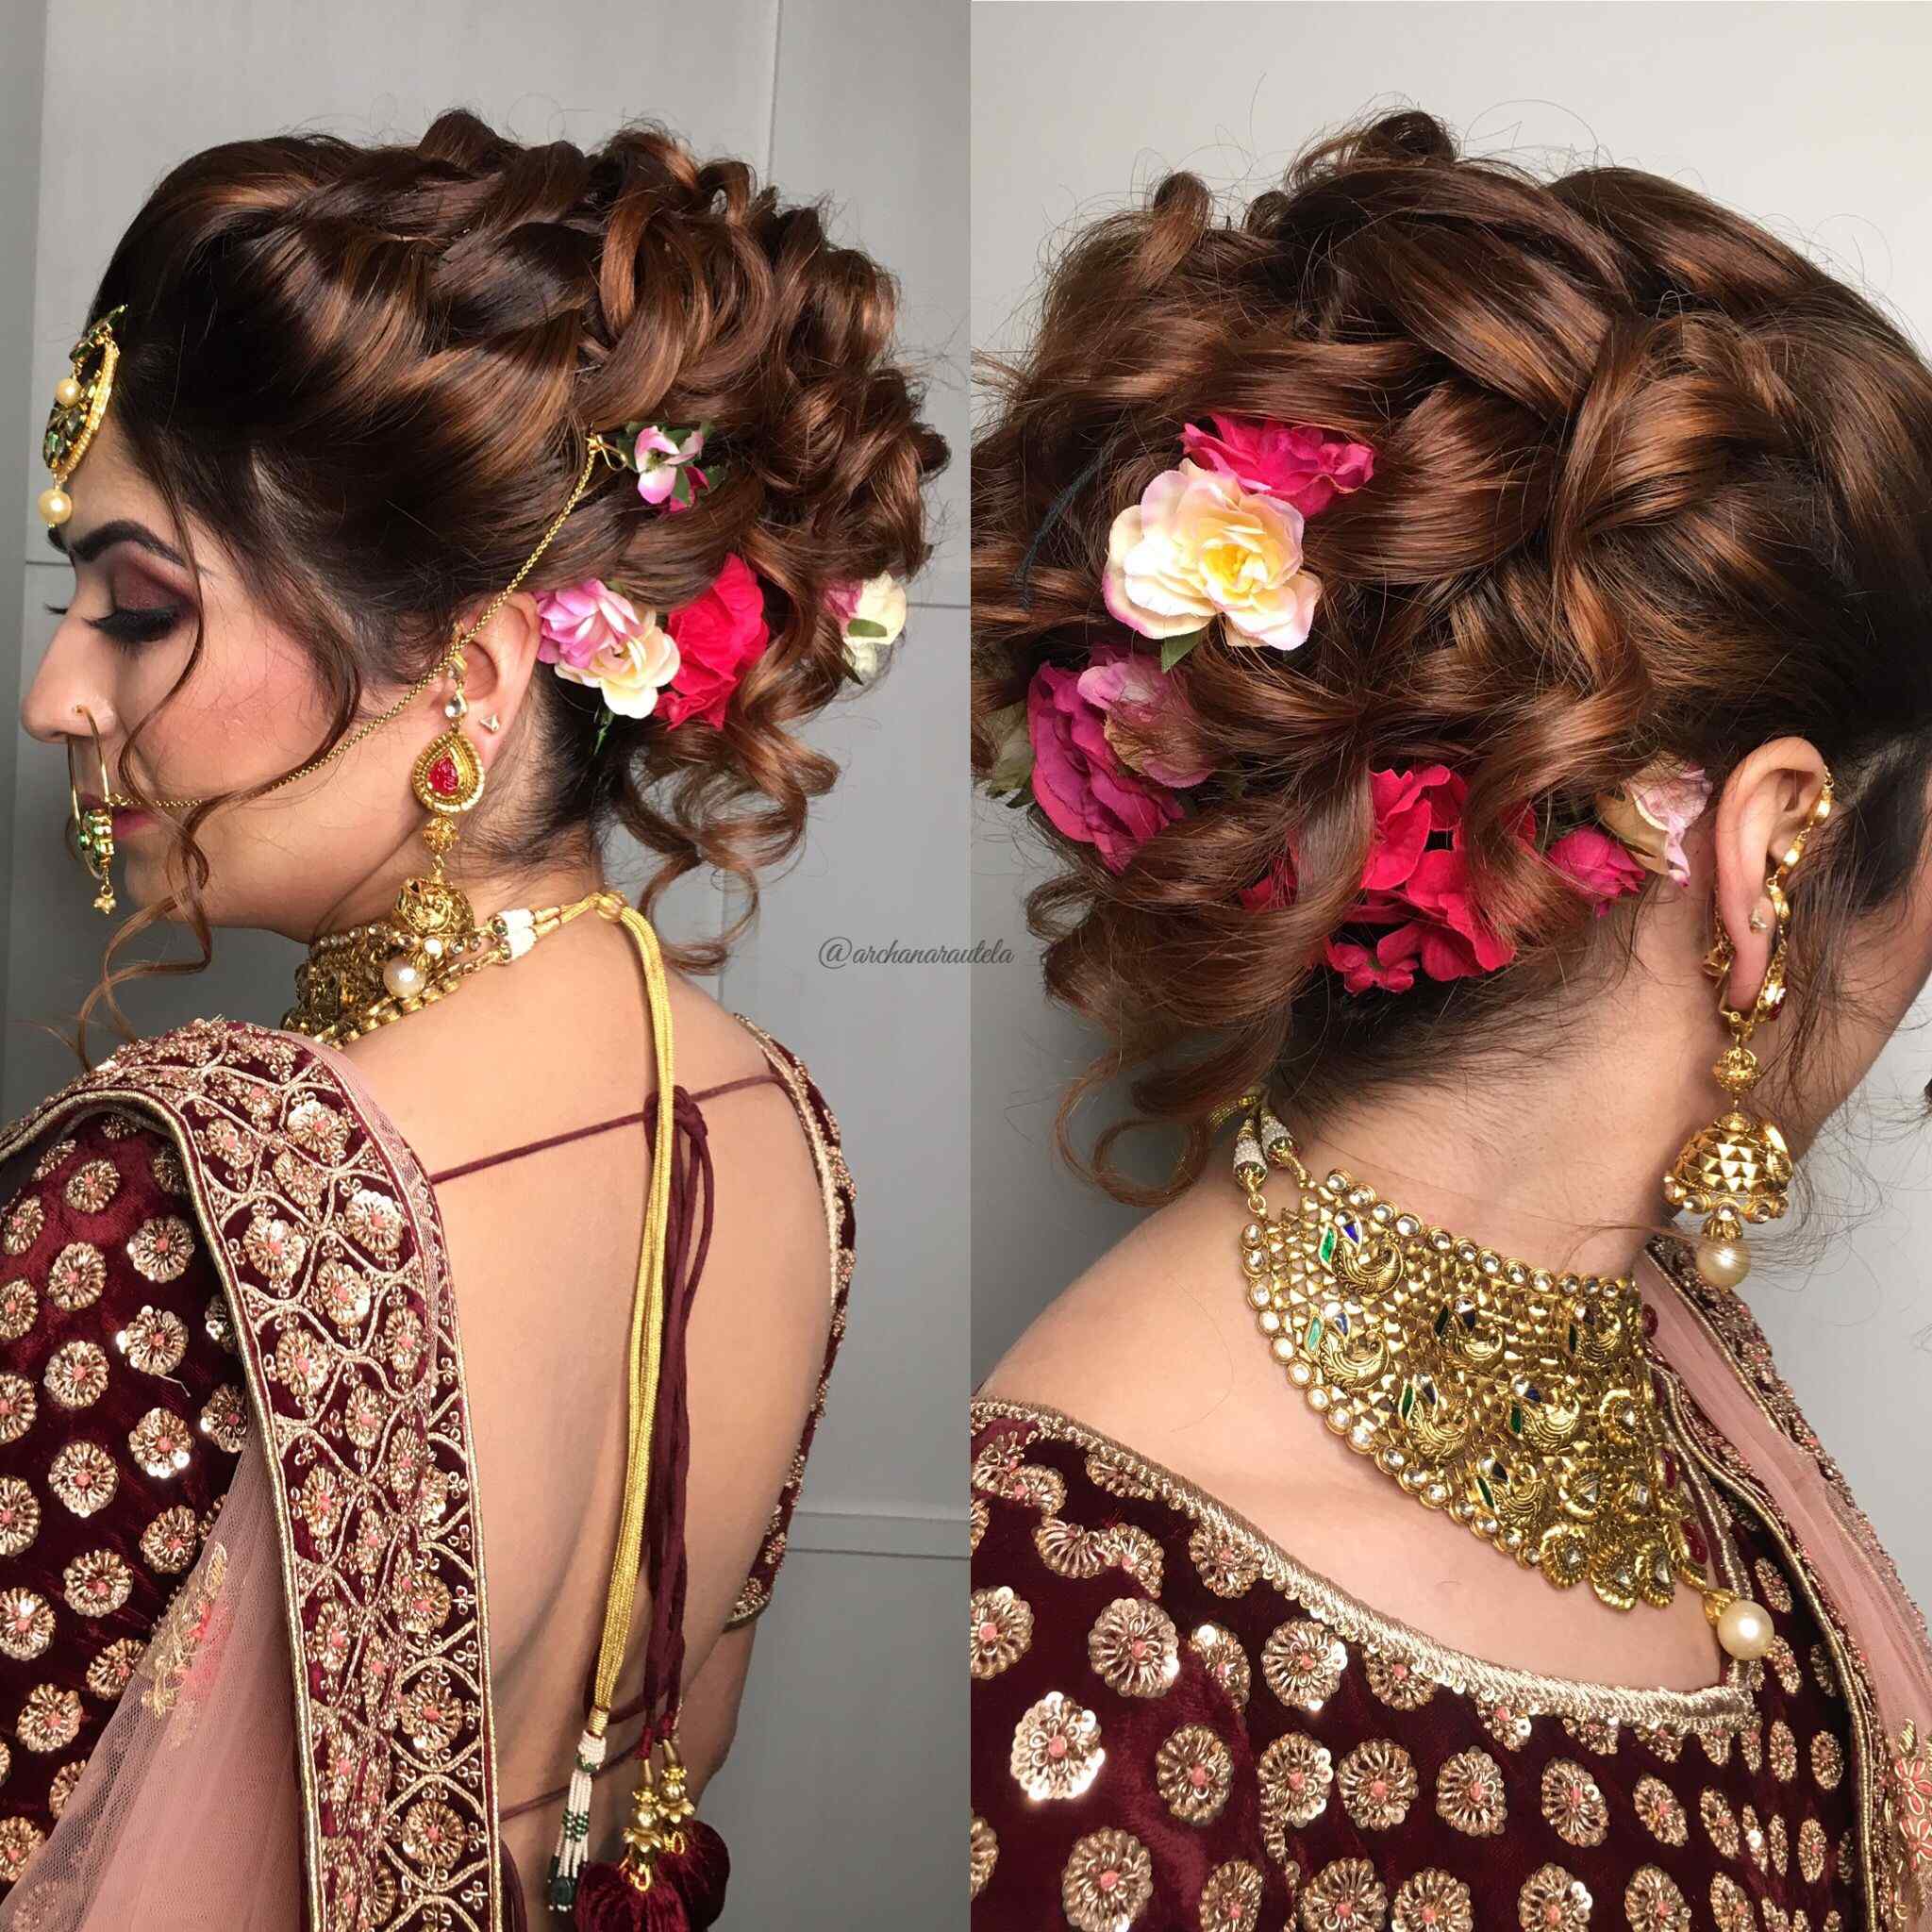 45+ Best South Indian Bridal Hairstyles | Indian wedding hairstyles, South indian  wedding hairstyles, Indian bridal hairstyles